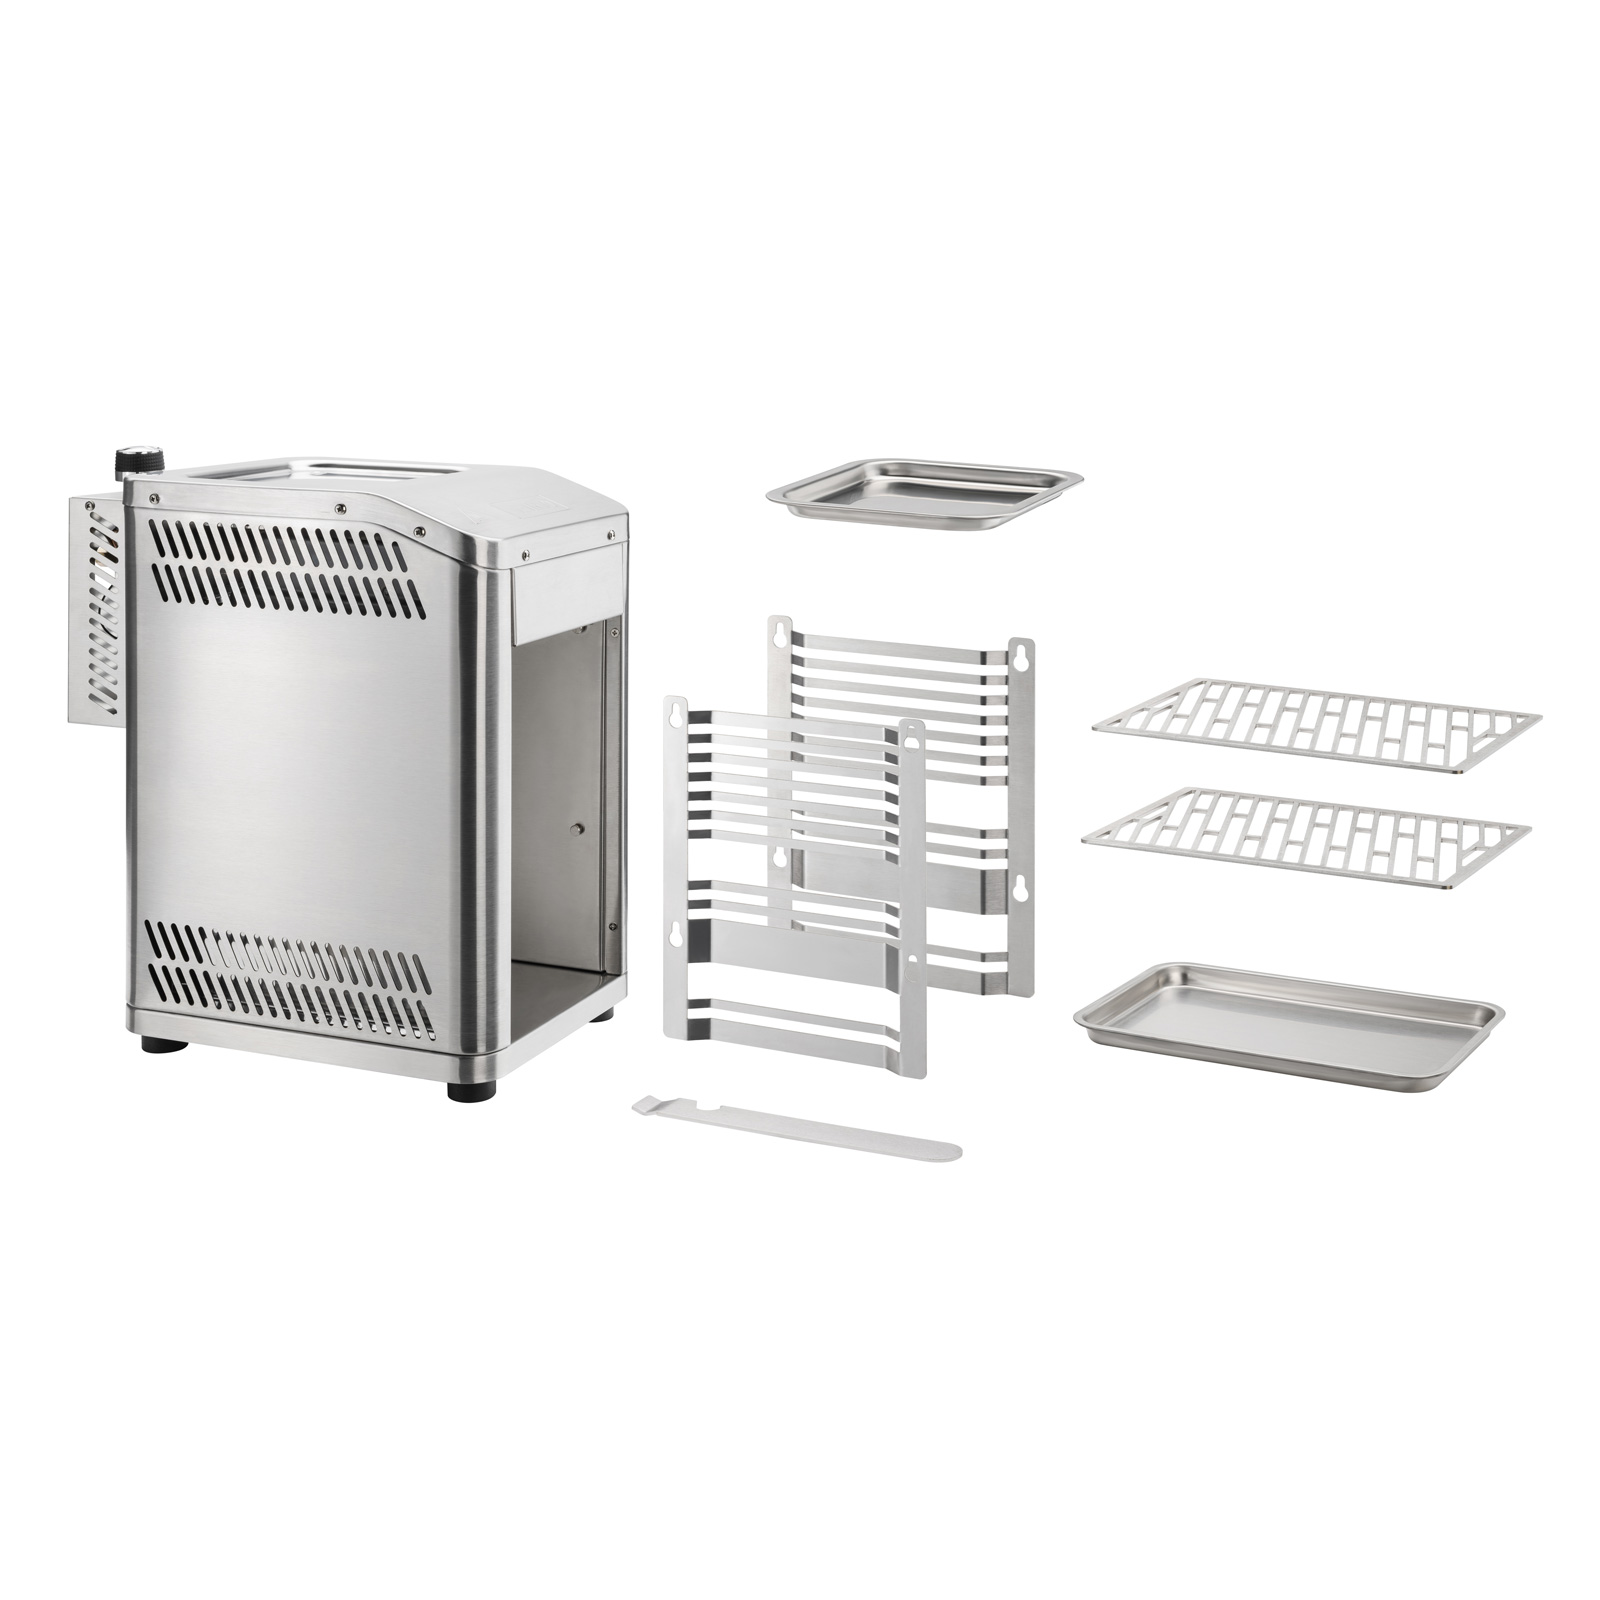 TAINO Beef-Grill Oberhitzegrill, Silber (3,5 kW)